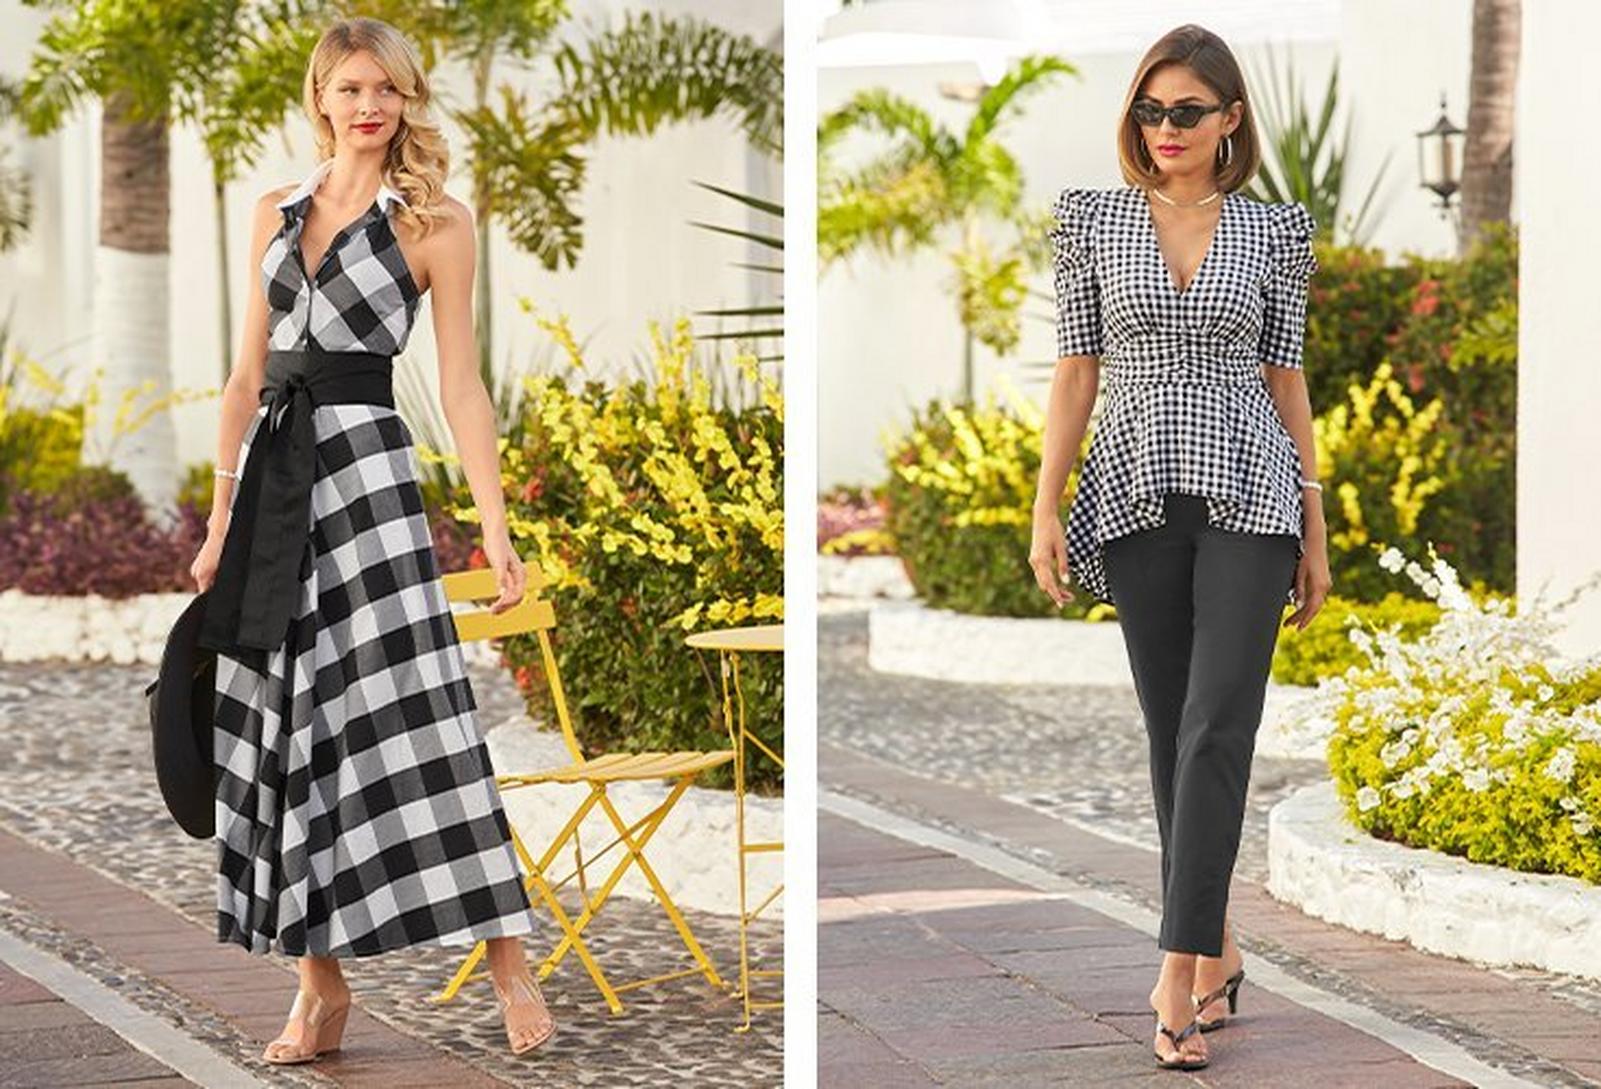 left model wearing a black and white gingham halter maxi dress and clear heels. right model wearing a black and white gingham puff-sleeve high-low top, black twill pants, and black low-heeled sandals.